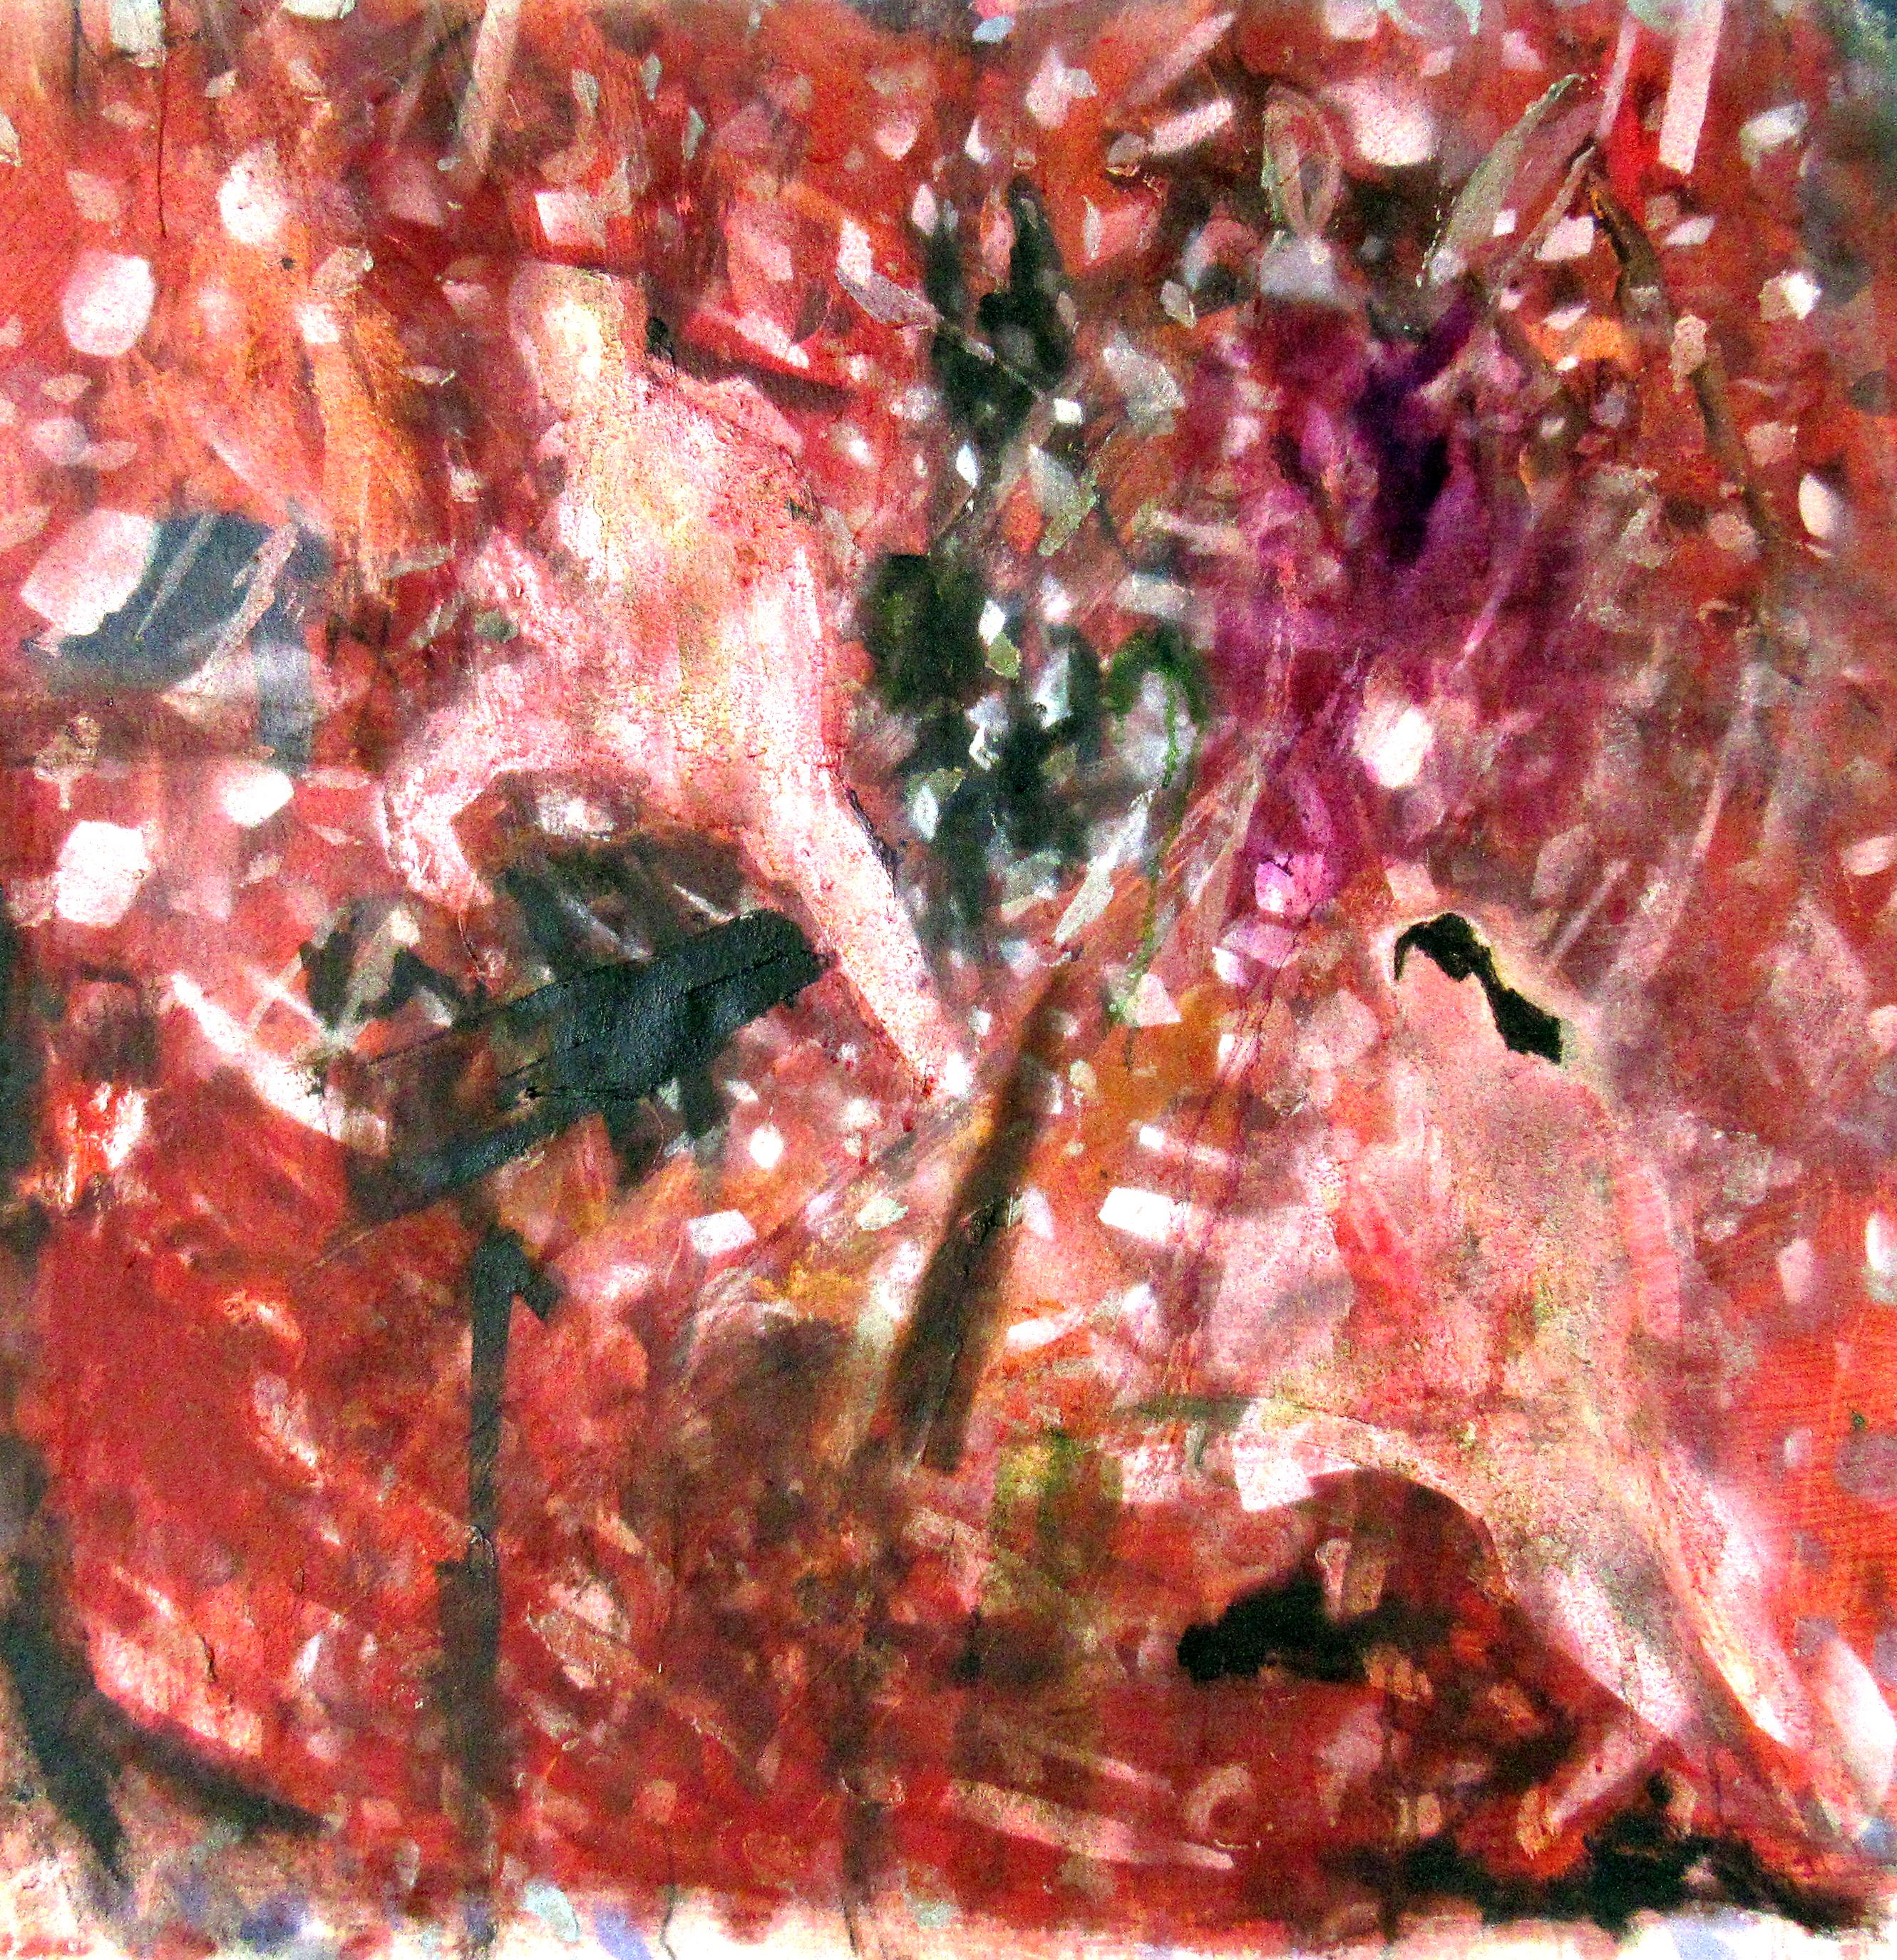 The Climb, colorful abstract patterns w figures, earthy red tones